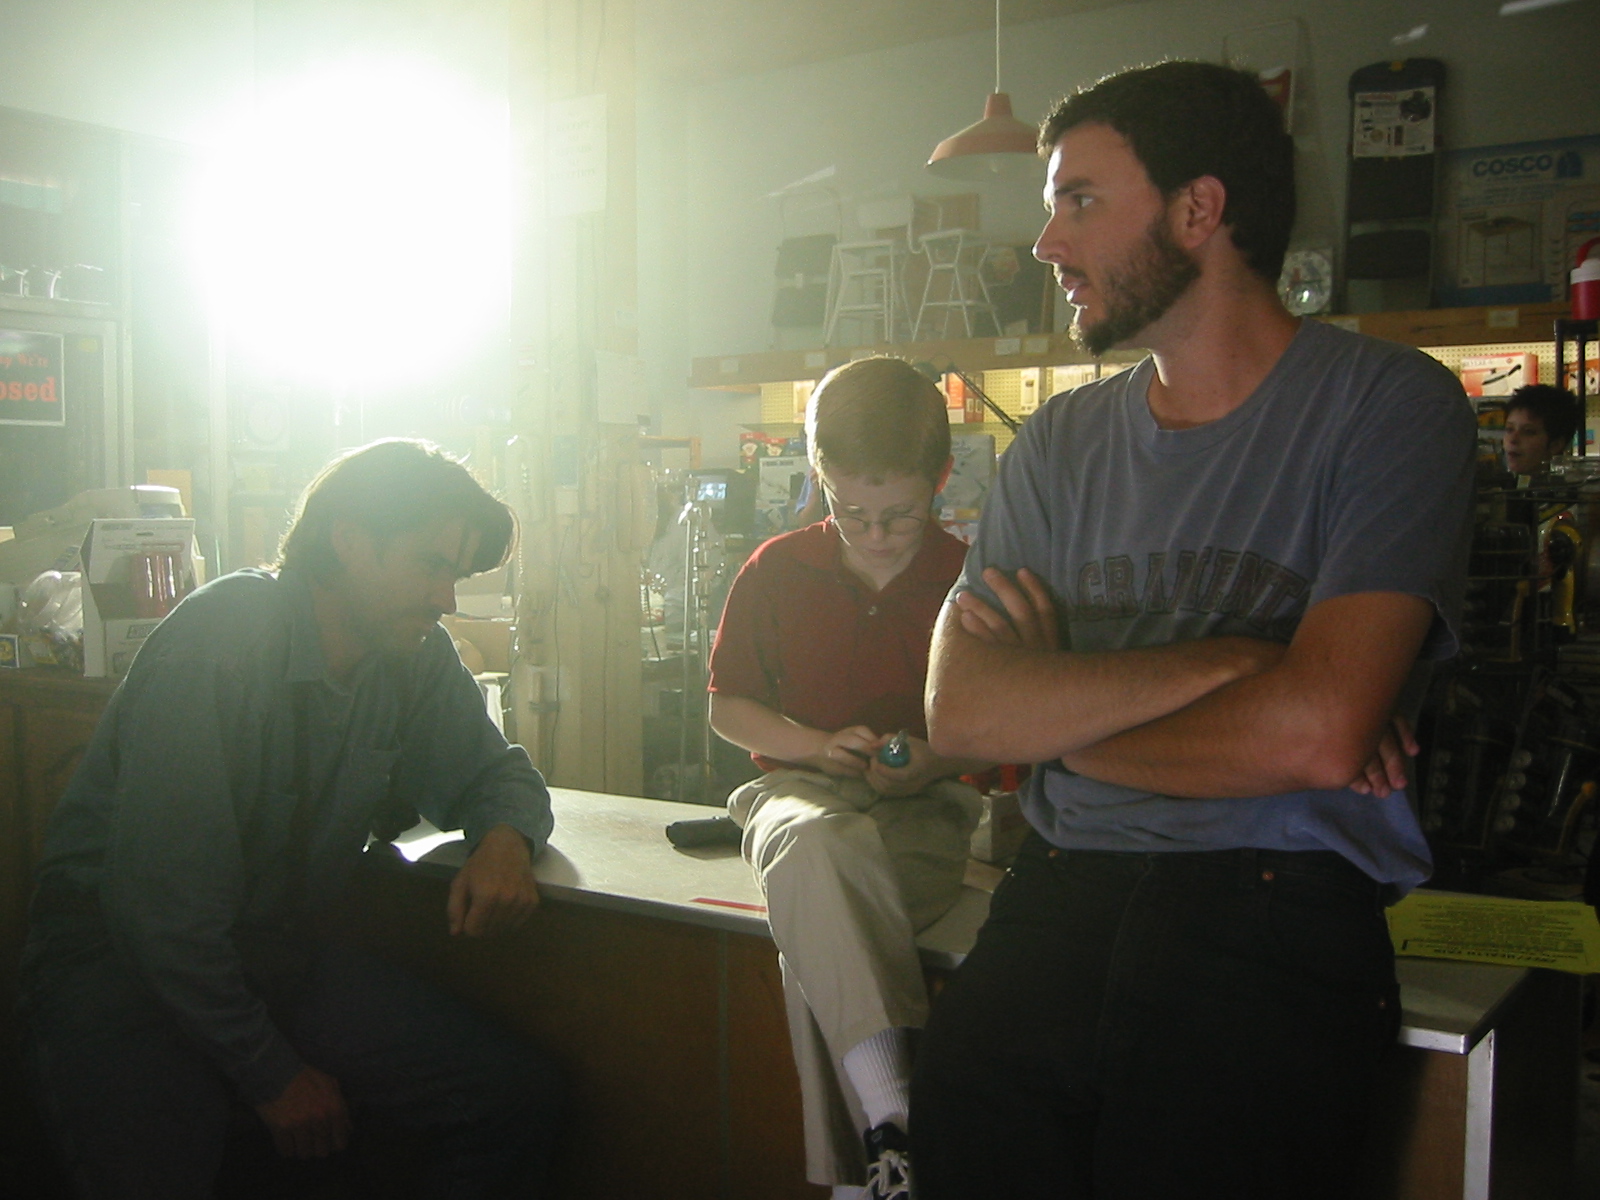 Christopher Taylor, Joshua Miller, and Michael Strode on the set of Black Gulch